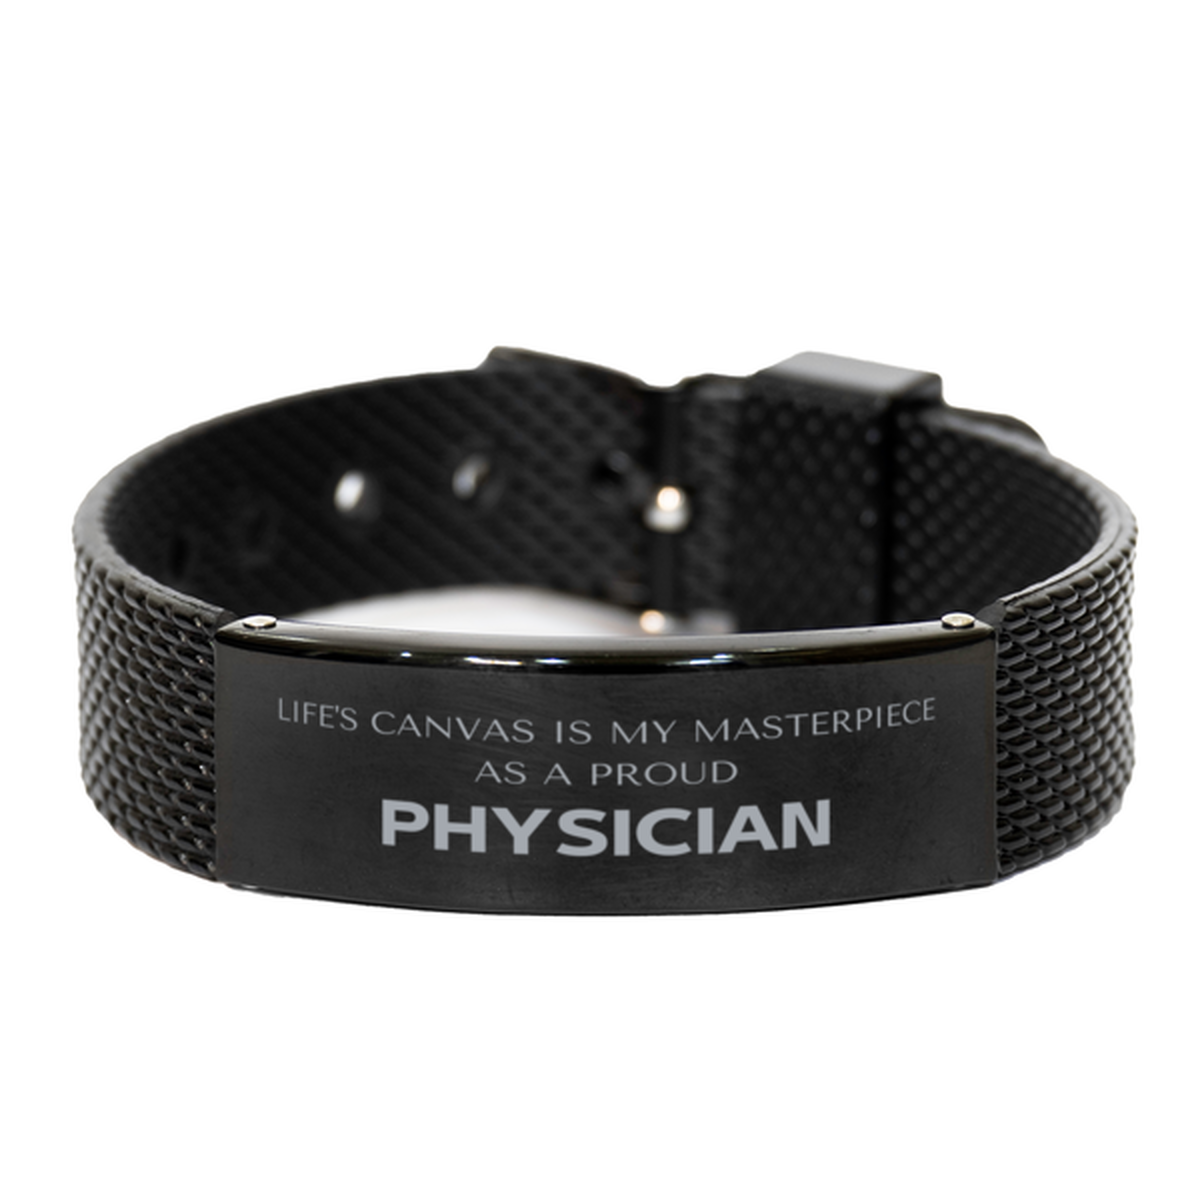 Proud Physician Gifts, Life's canvas is my masterpiece, Epic Birthday Christmas Unique Black Shark Mesh Bracelet For Physician, Coworkers, Men, Women, Friends